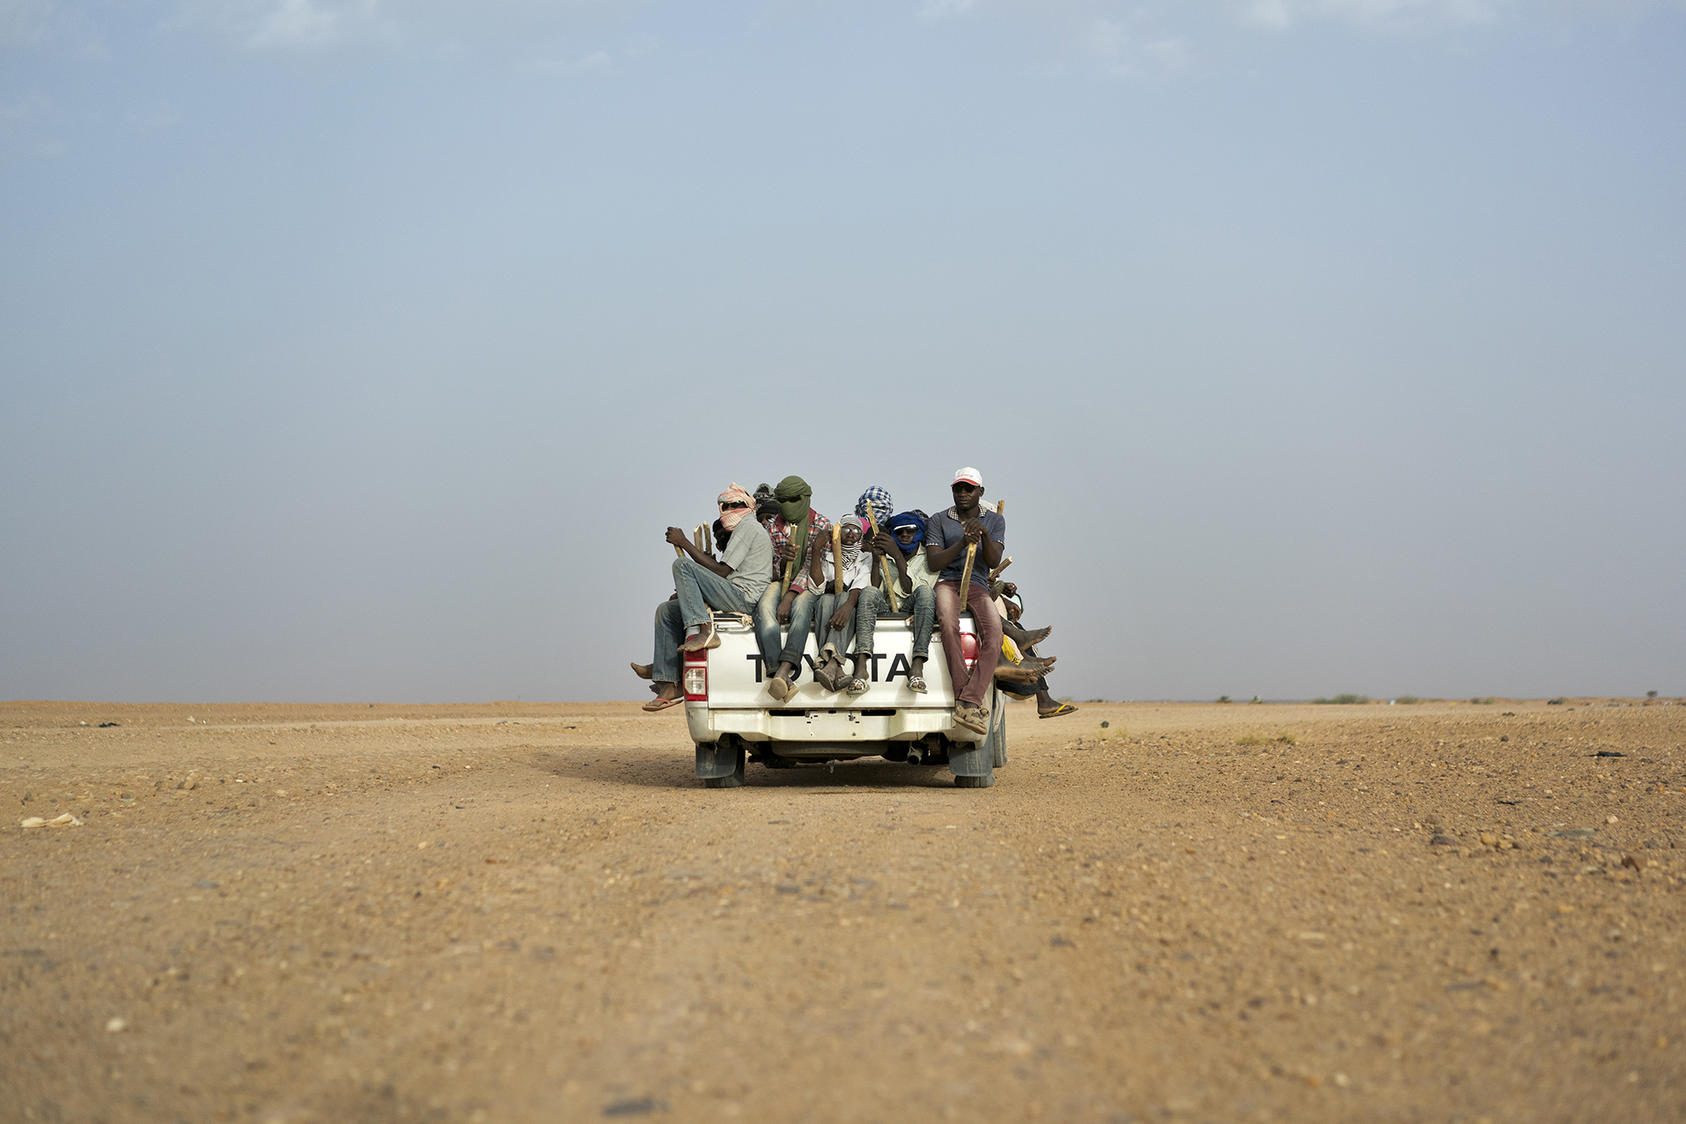 Drugs are often transported across Libya alongside migrants packed into 4x4 vehicles such as this one heading north from Agadez, Niger, on June 4, 2018. (Jerome Delay/AP)